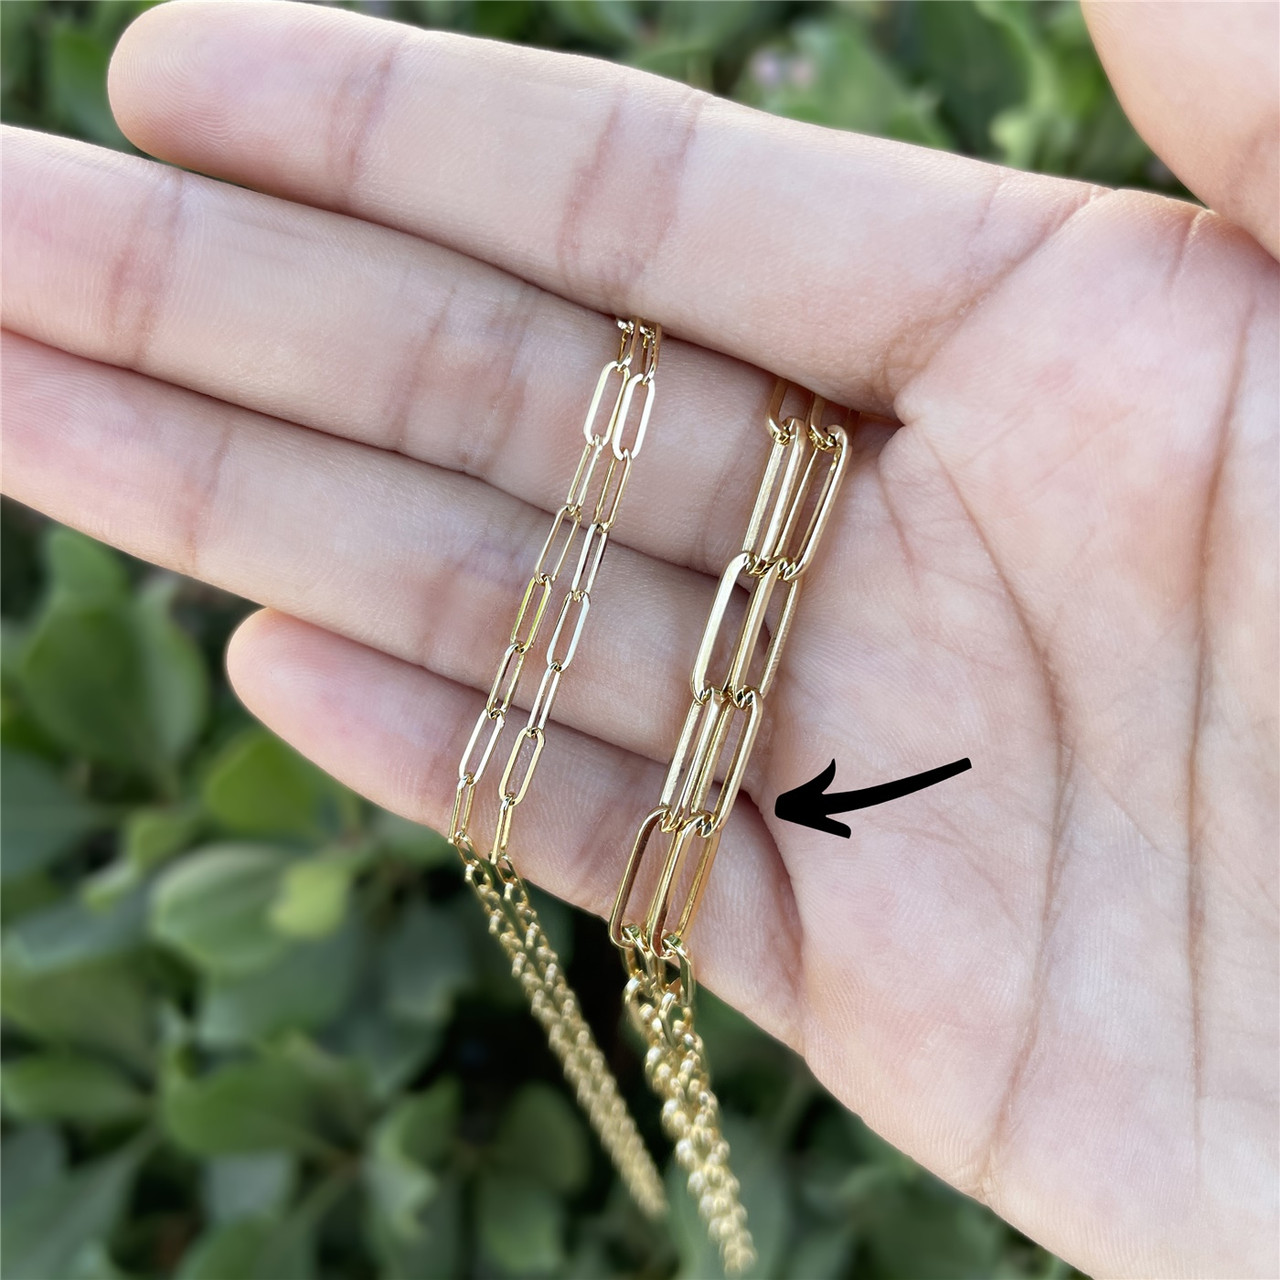 yellow gold paperclip chains 2 34723.1649709428